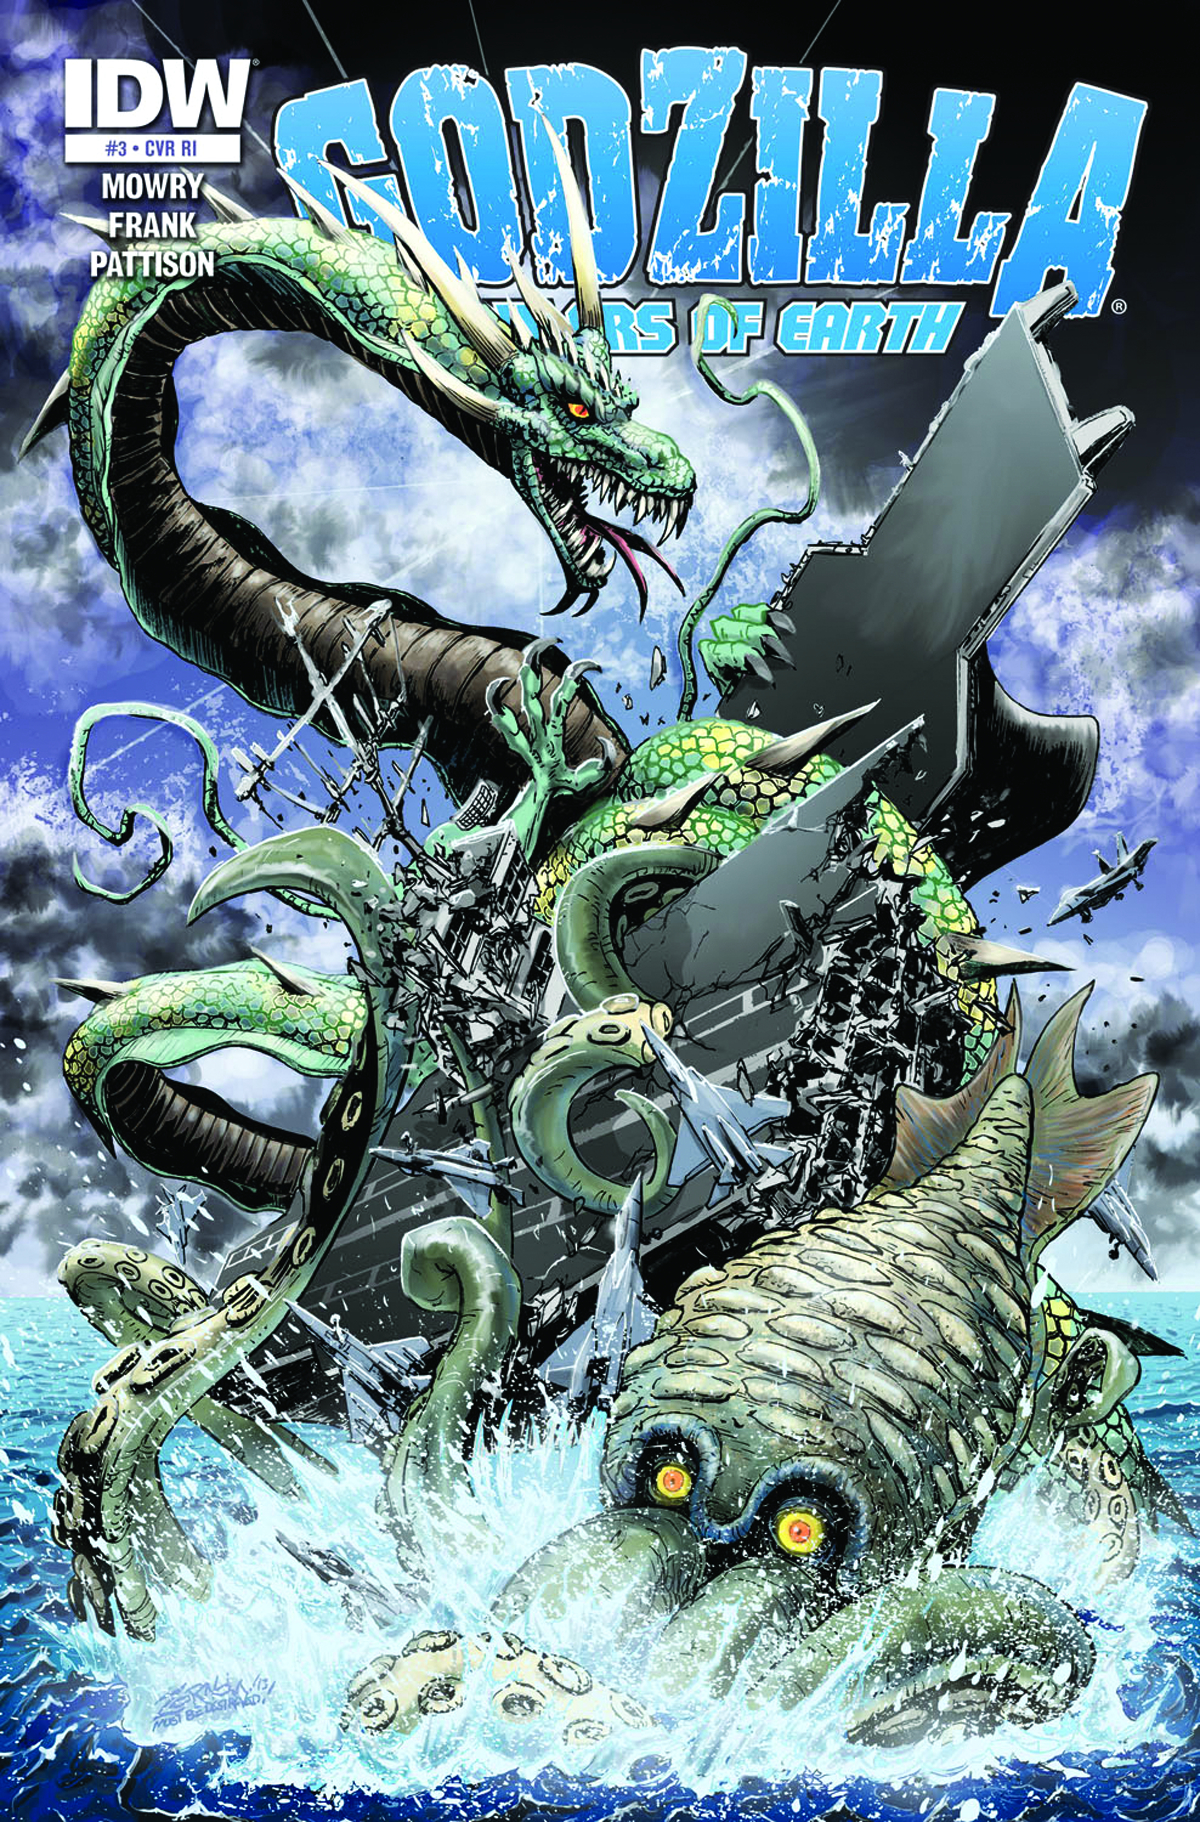 Godzilla Ruler of Earth #1 Roars in with a 3 out of 5!